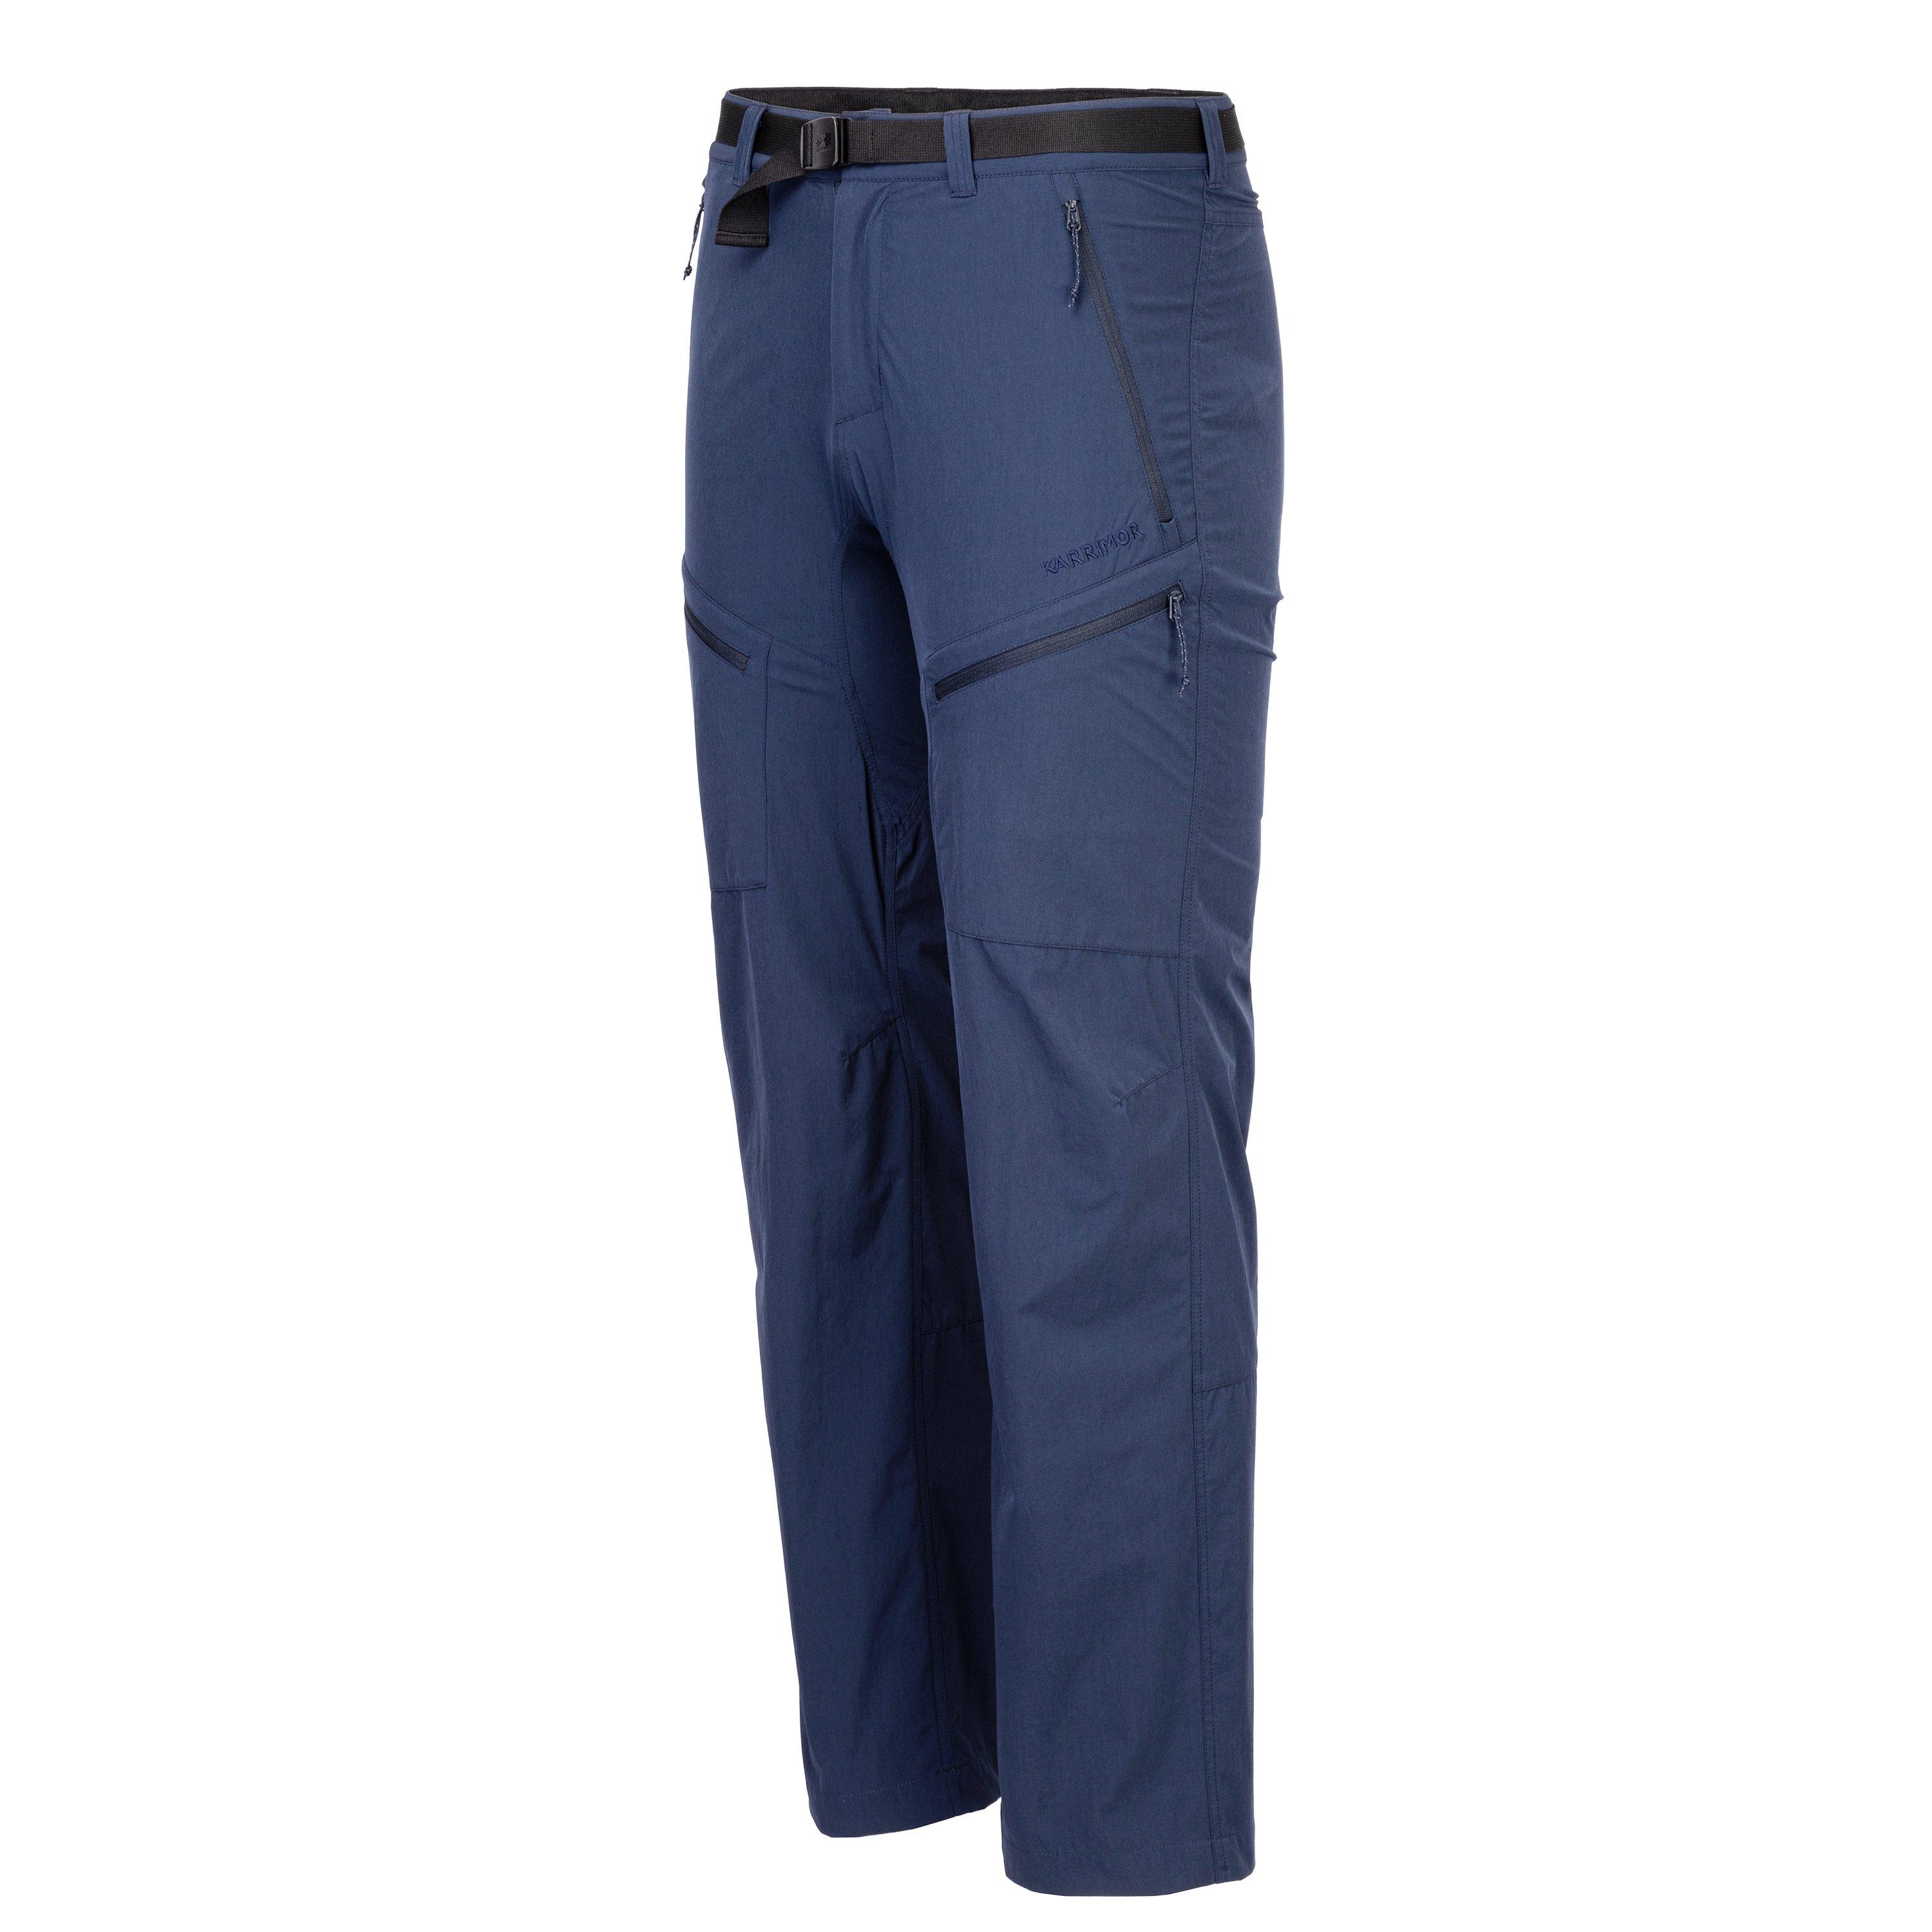 Karrimor  Panther Zipped Trousers  Convertible Trousers  SportsDirectcom